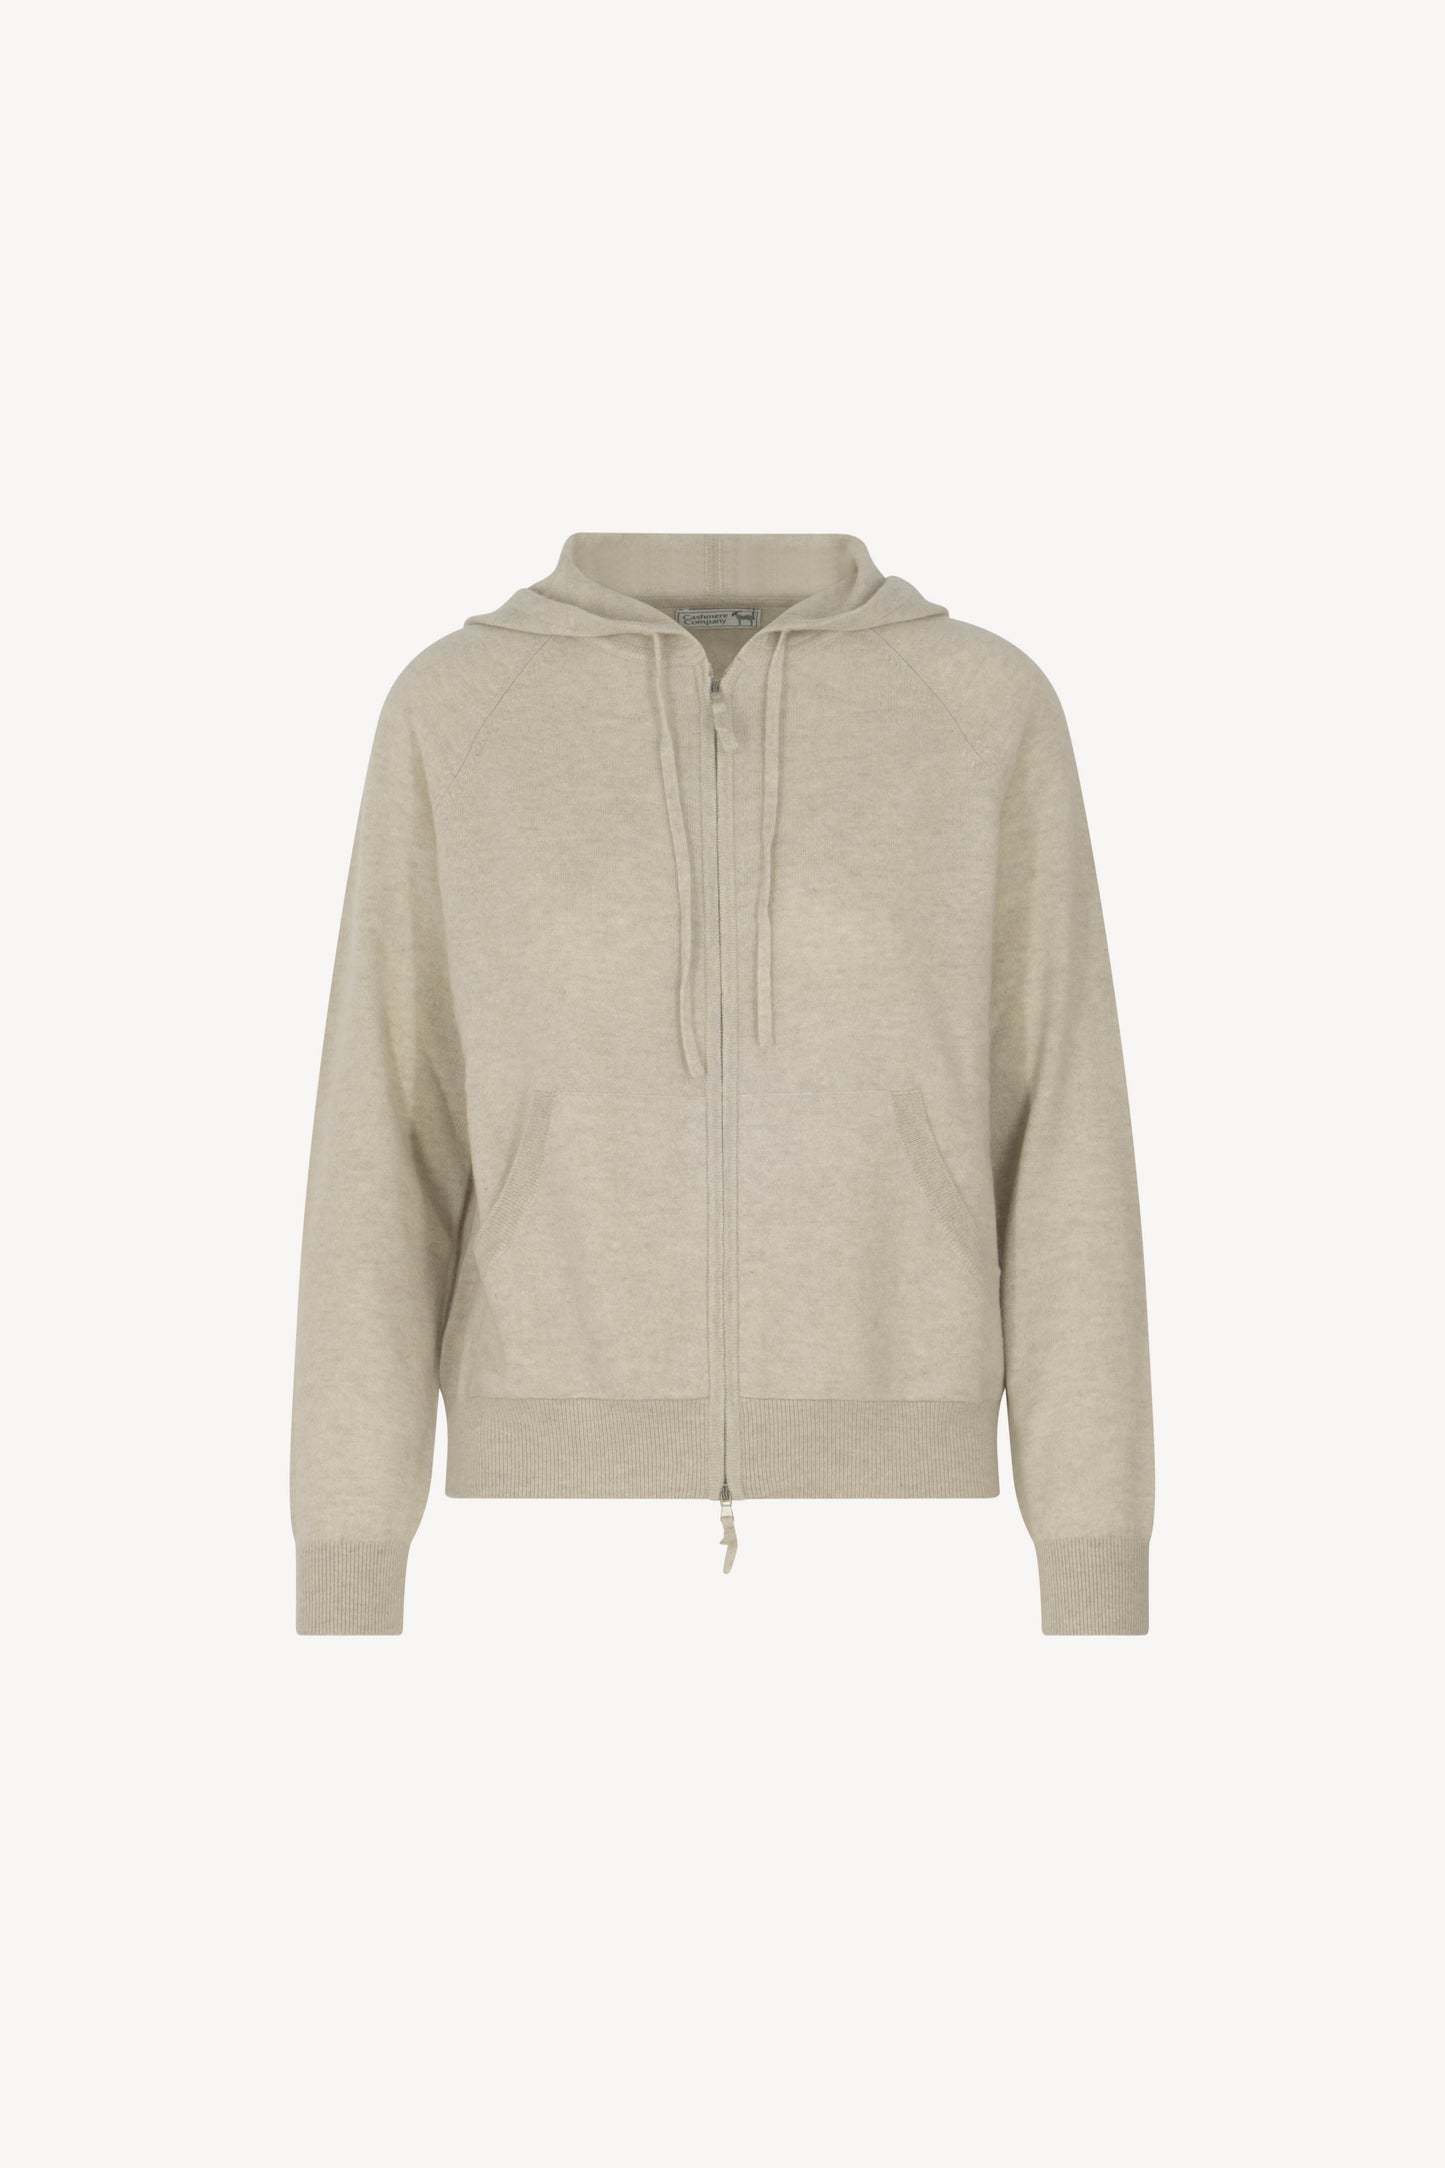 Pure Cashmere Women's Hooded Bomber Jacket